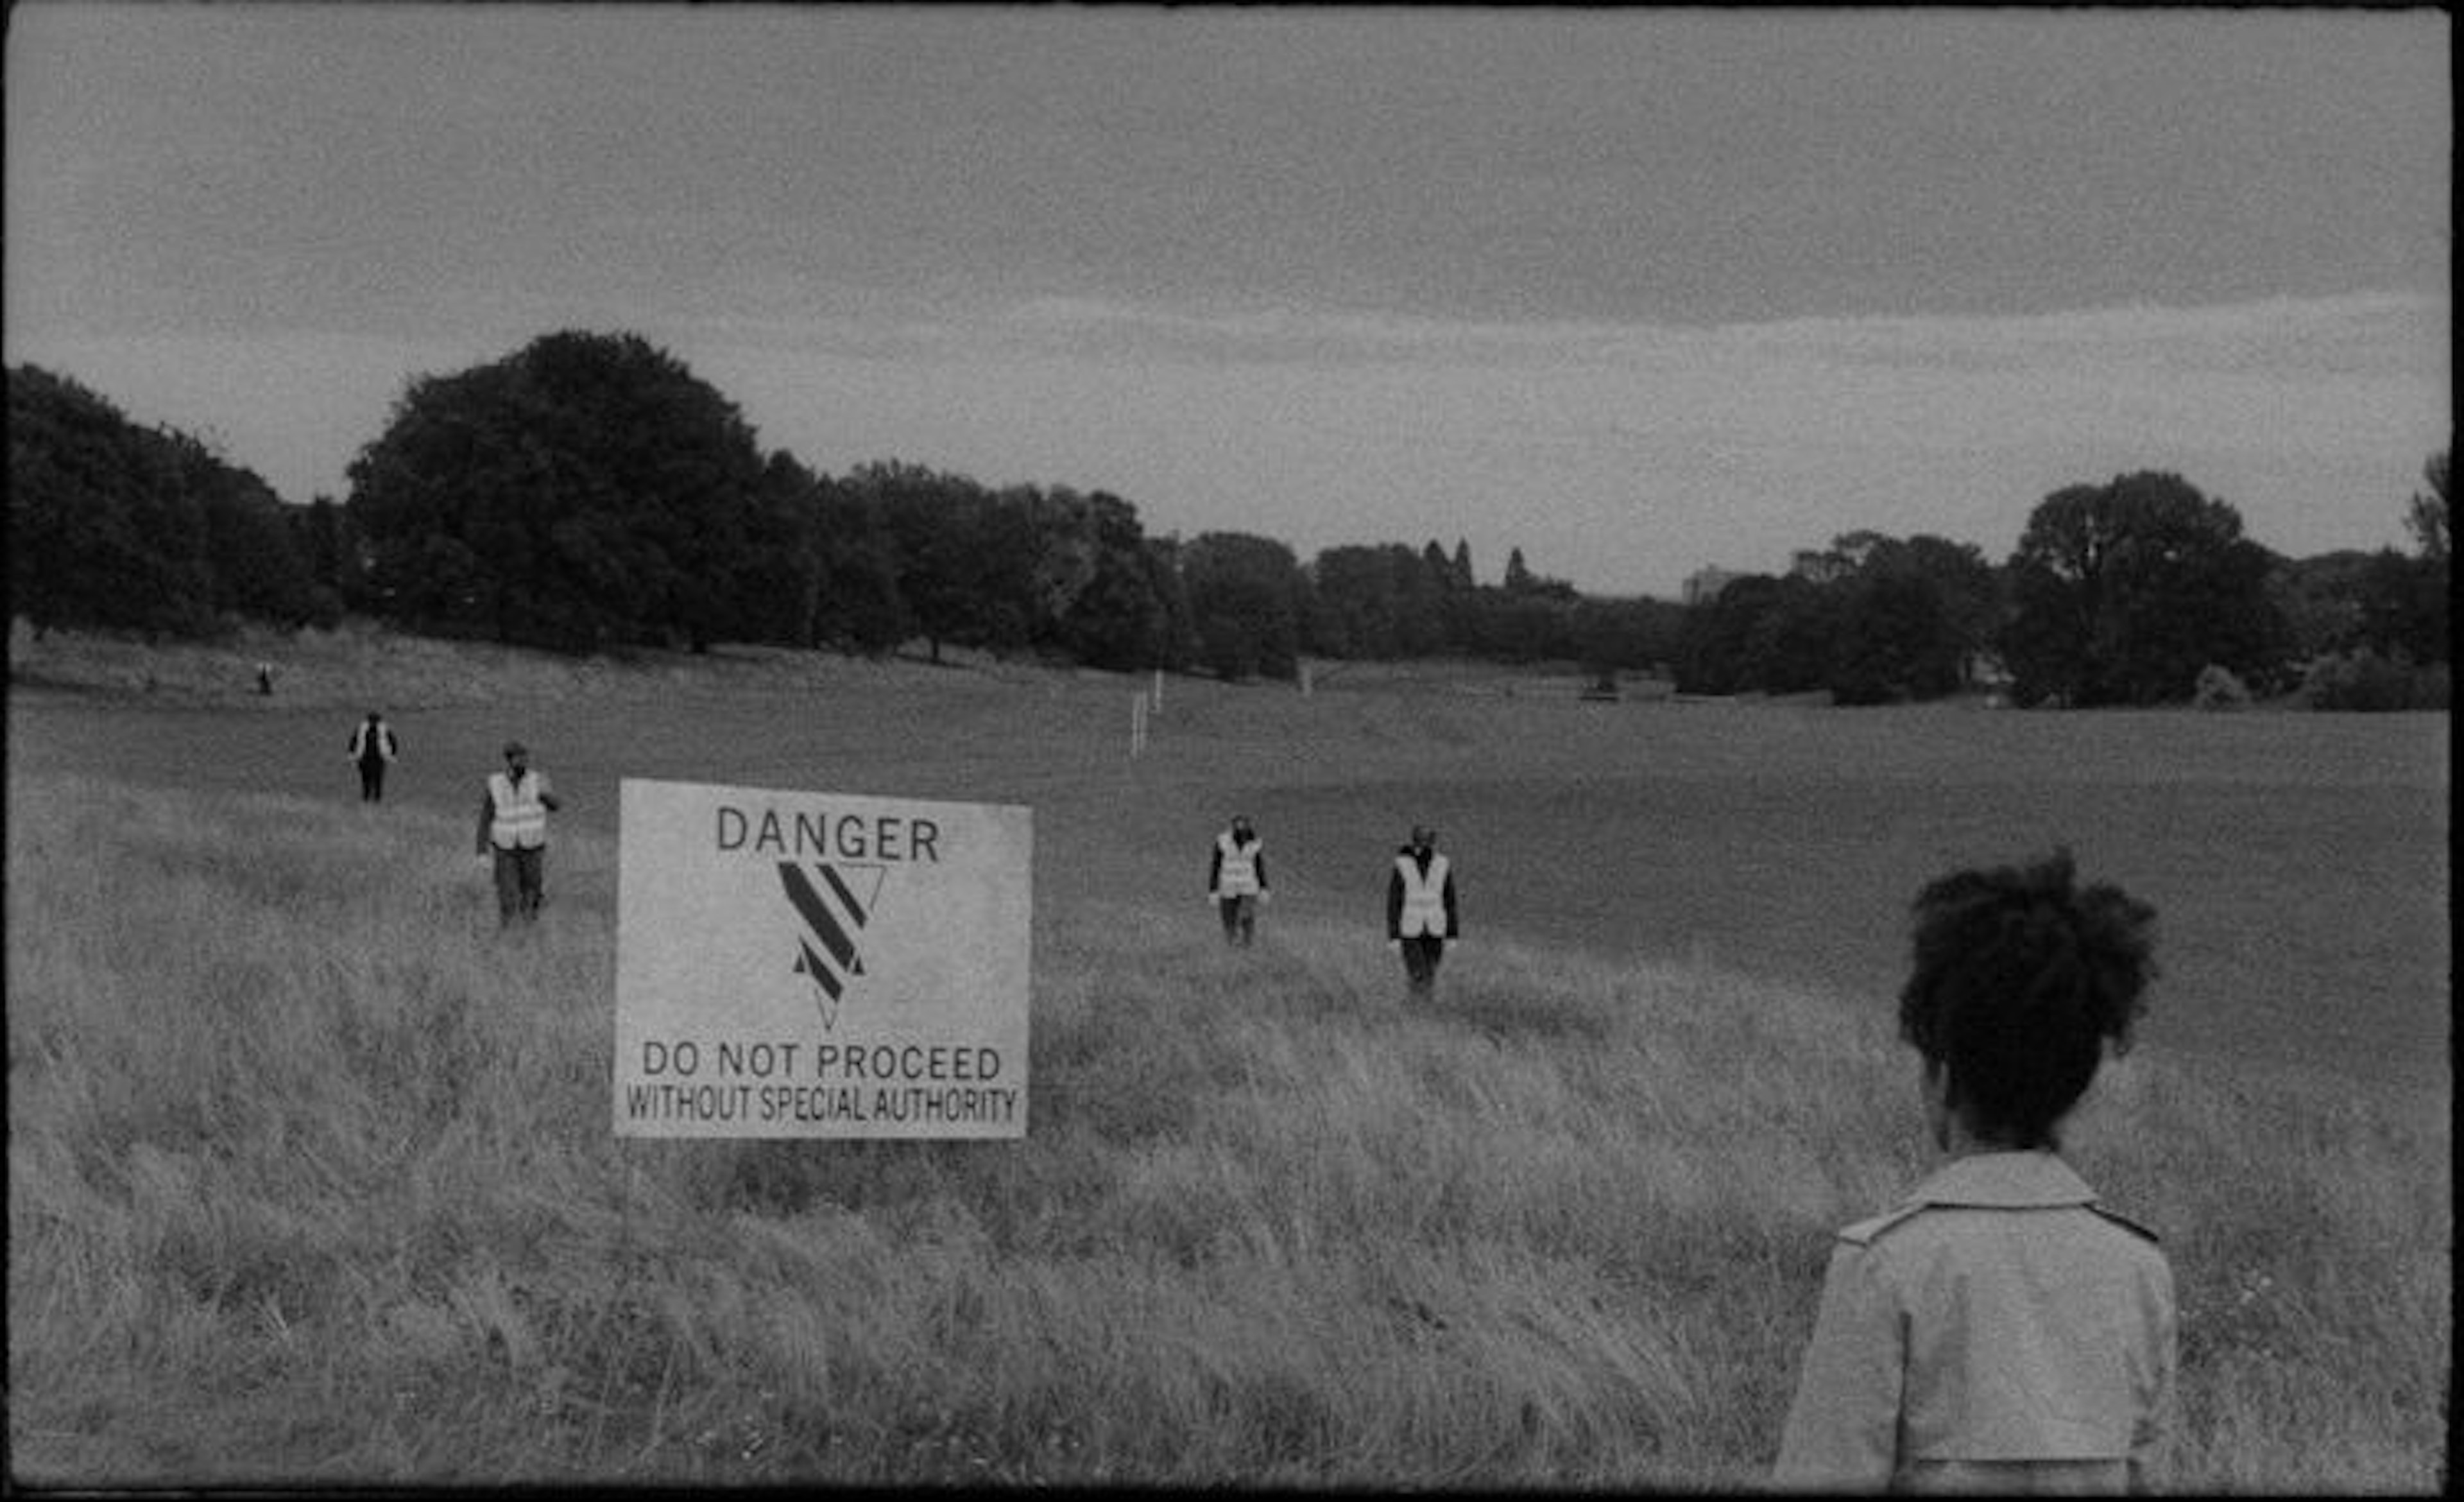 Black and white film still of a field, on the left a large sign that reads “Danger do not proceed without special authority”. There is a person in the foreground looking at a group of people wearing safety vests behind the sign.